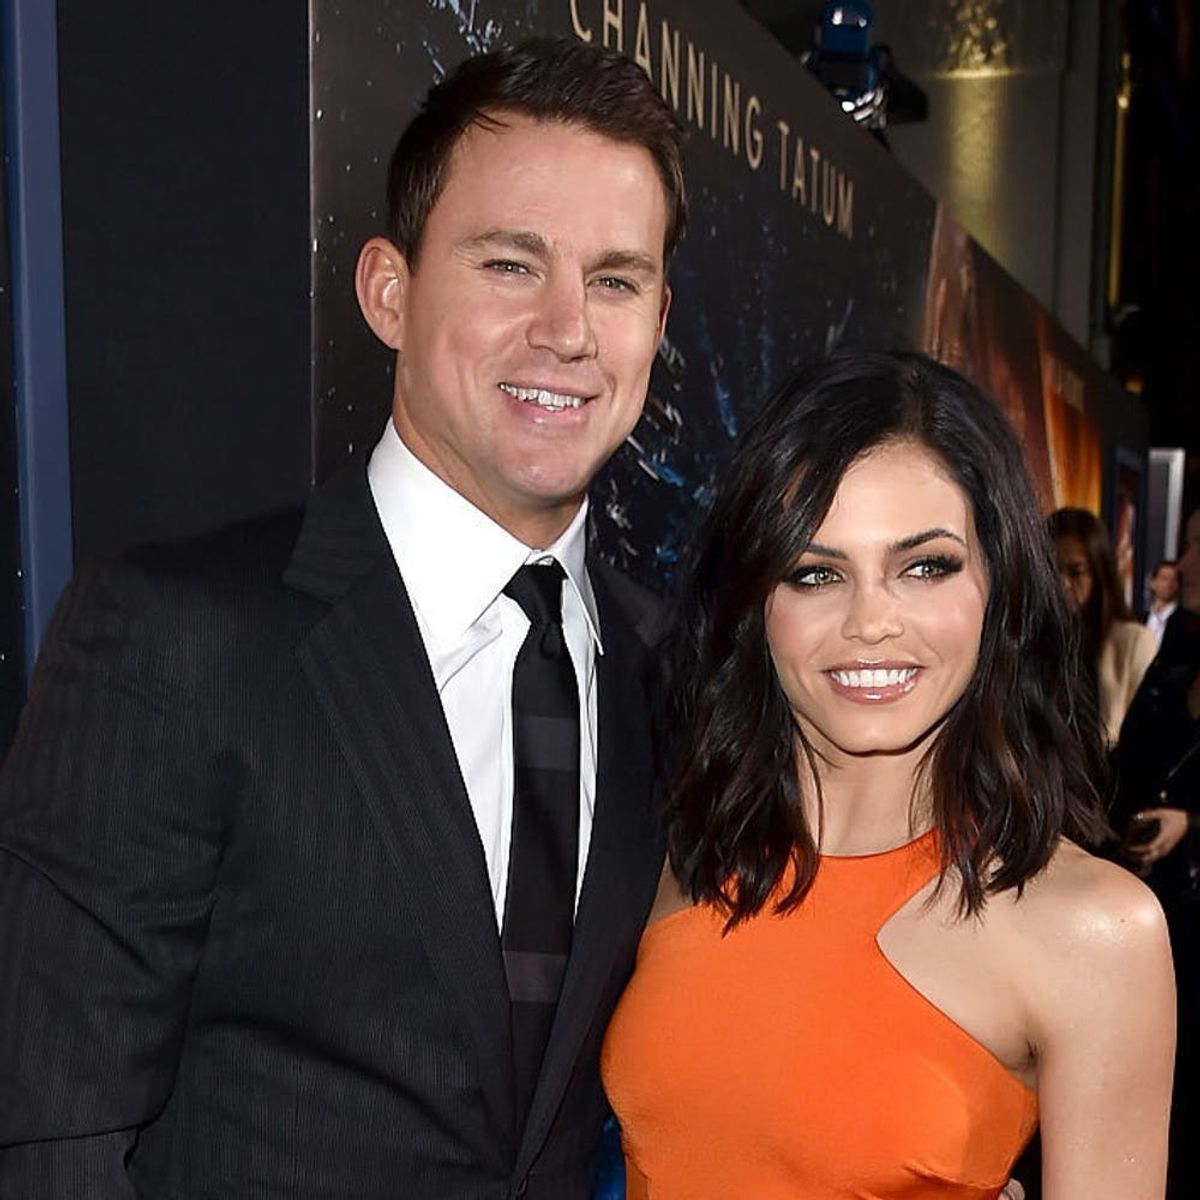 Channing Tatum’s 4-Year-Old Daughter Everly REALLY Didn’t Like Step Up